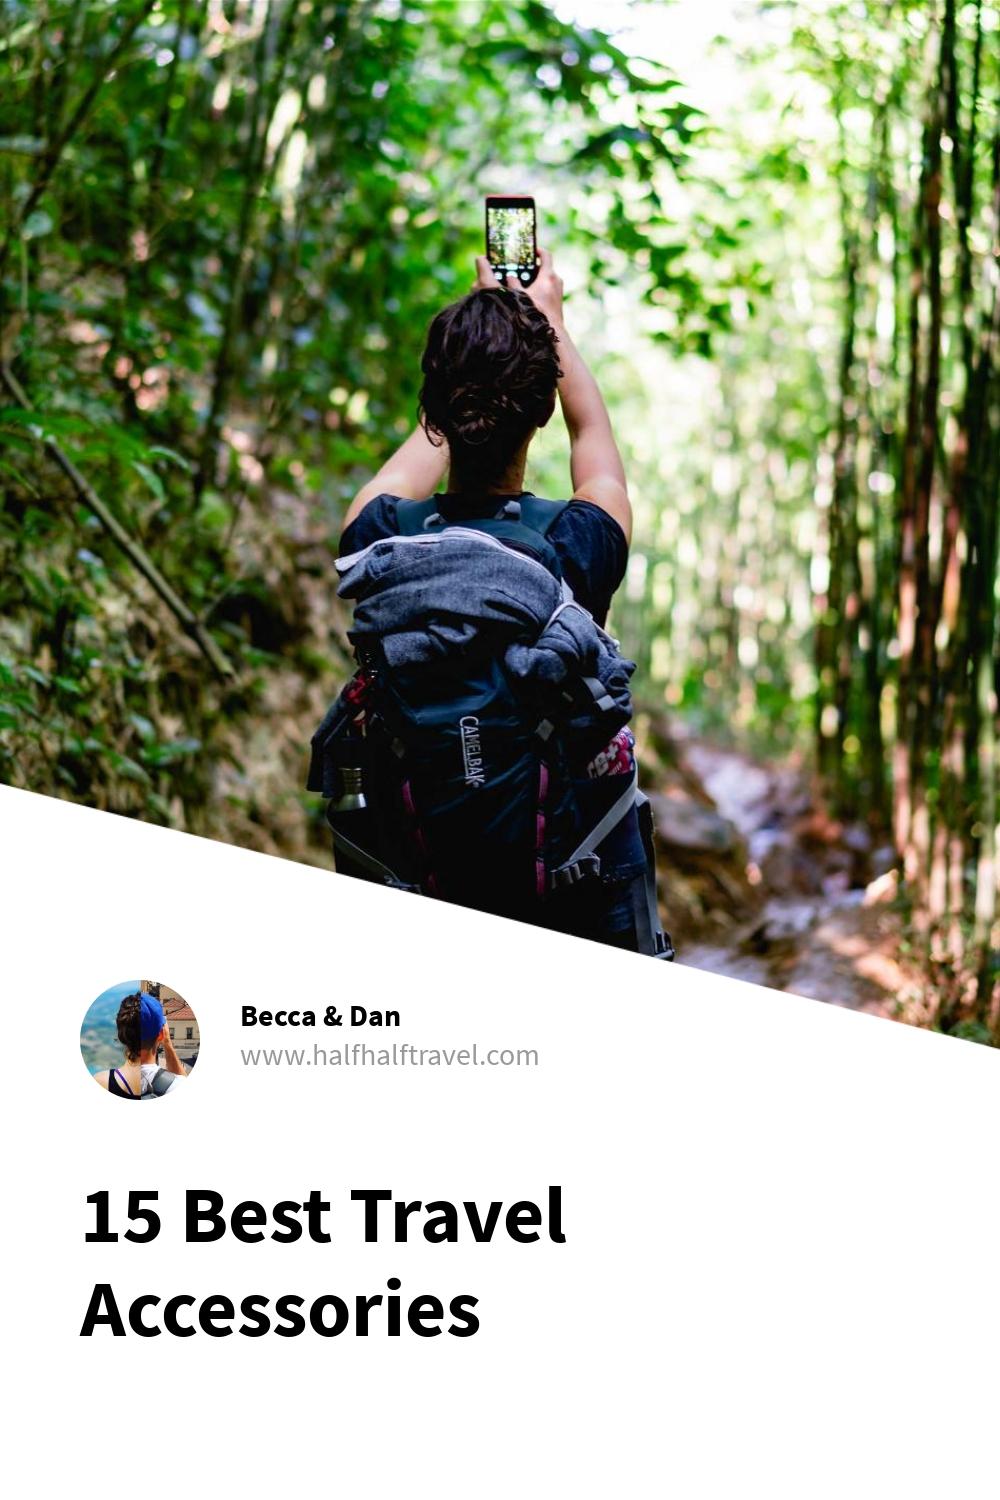 Best Travel Accessories - My Own Set of Travel Gear (Updated